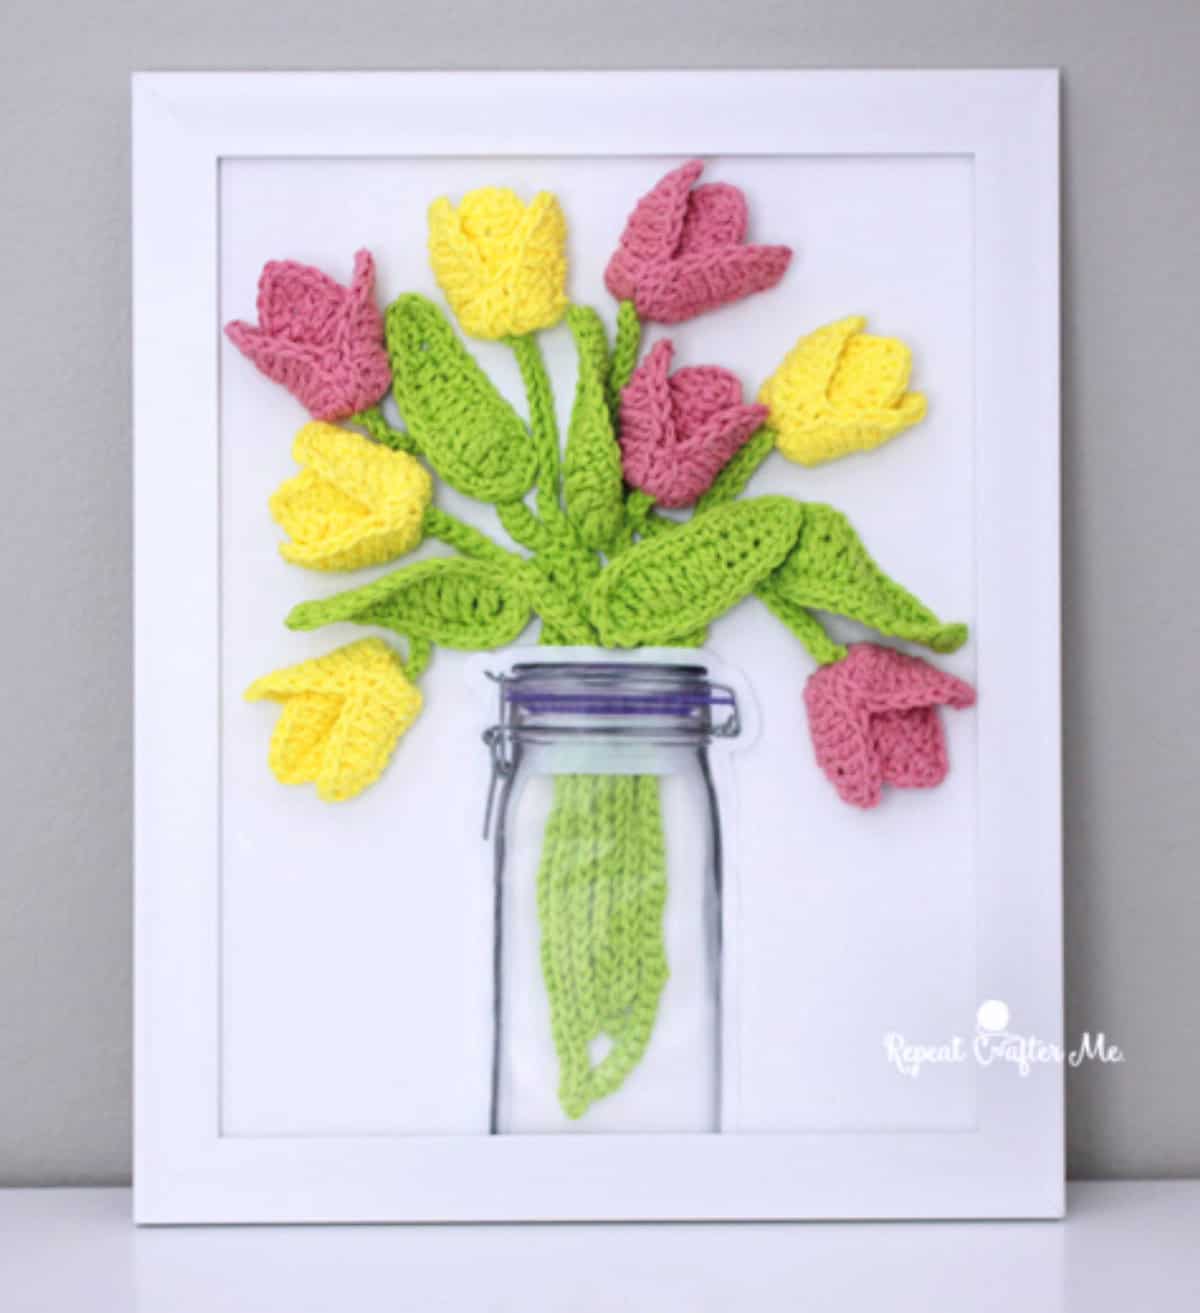 Crocheted tulips in a vase in the picture frame.